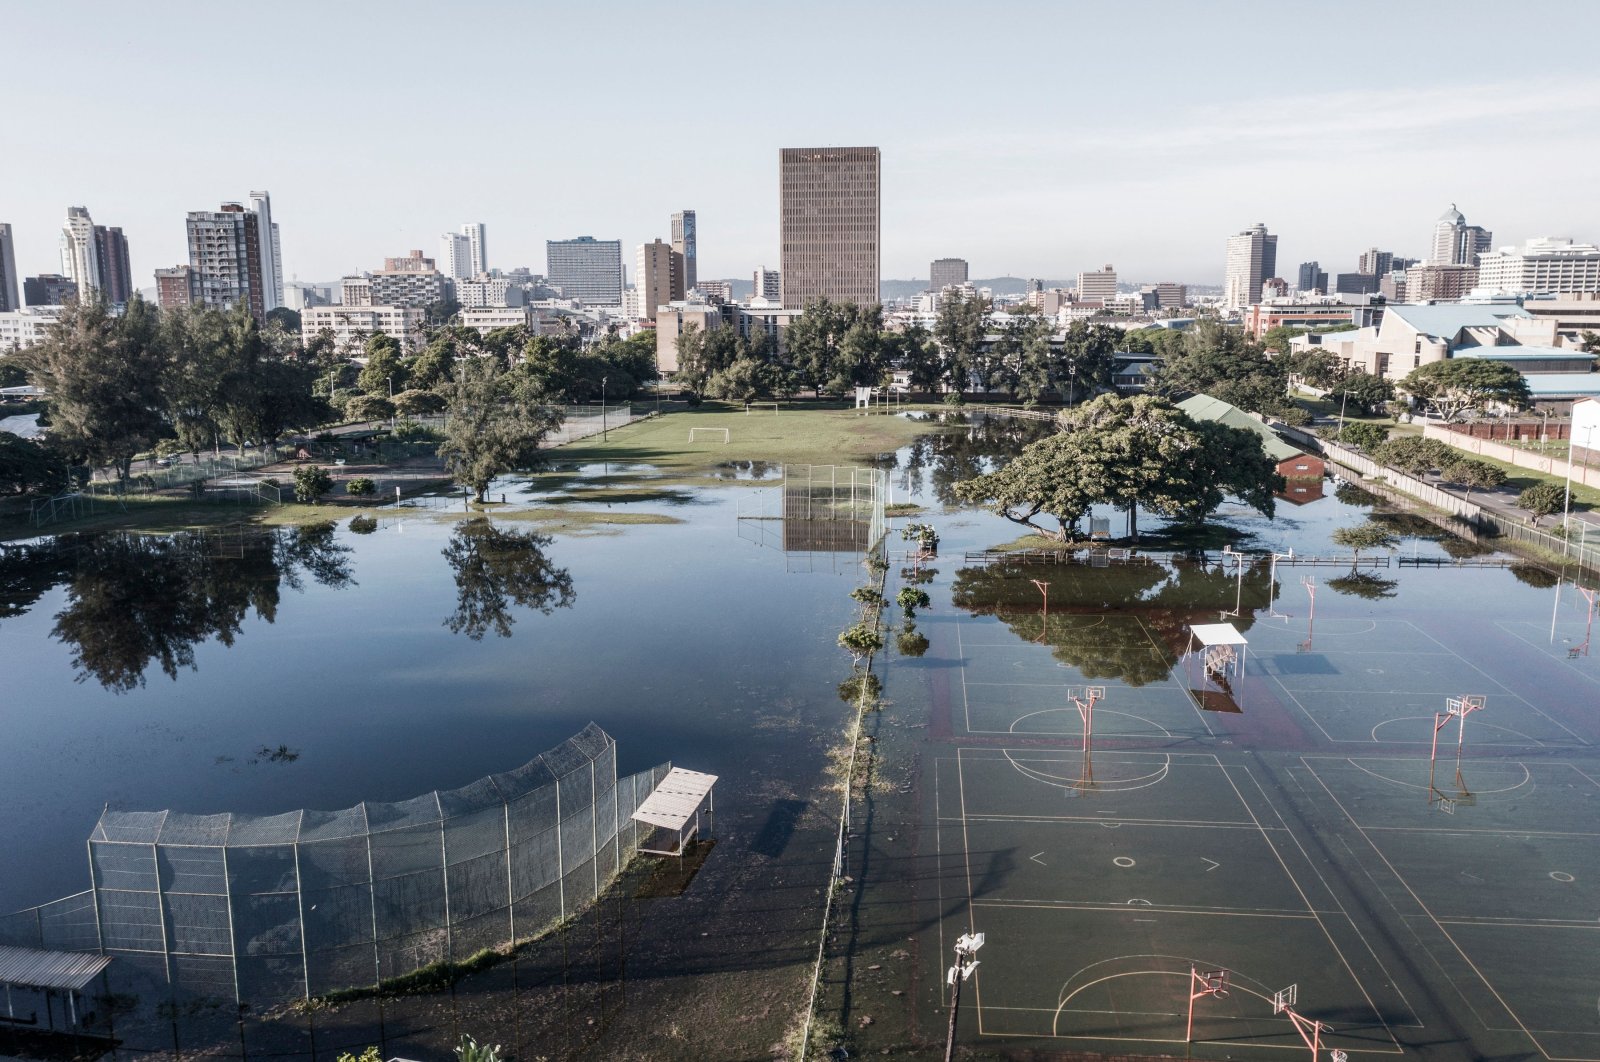 An aerial view shows sports fields under water days after heavy rains and &quot;unprecedented&quot; floods wreaked havoc in Durban, South Africa, April 15, 2022. (AFP Photo)